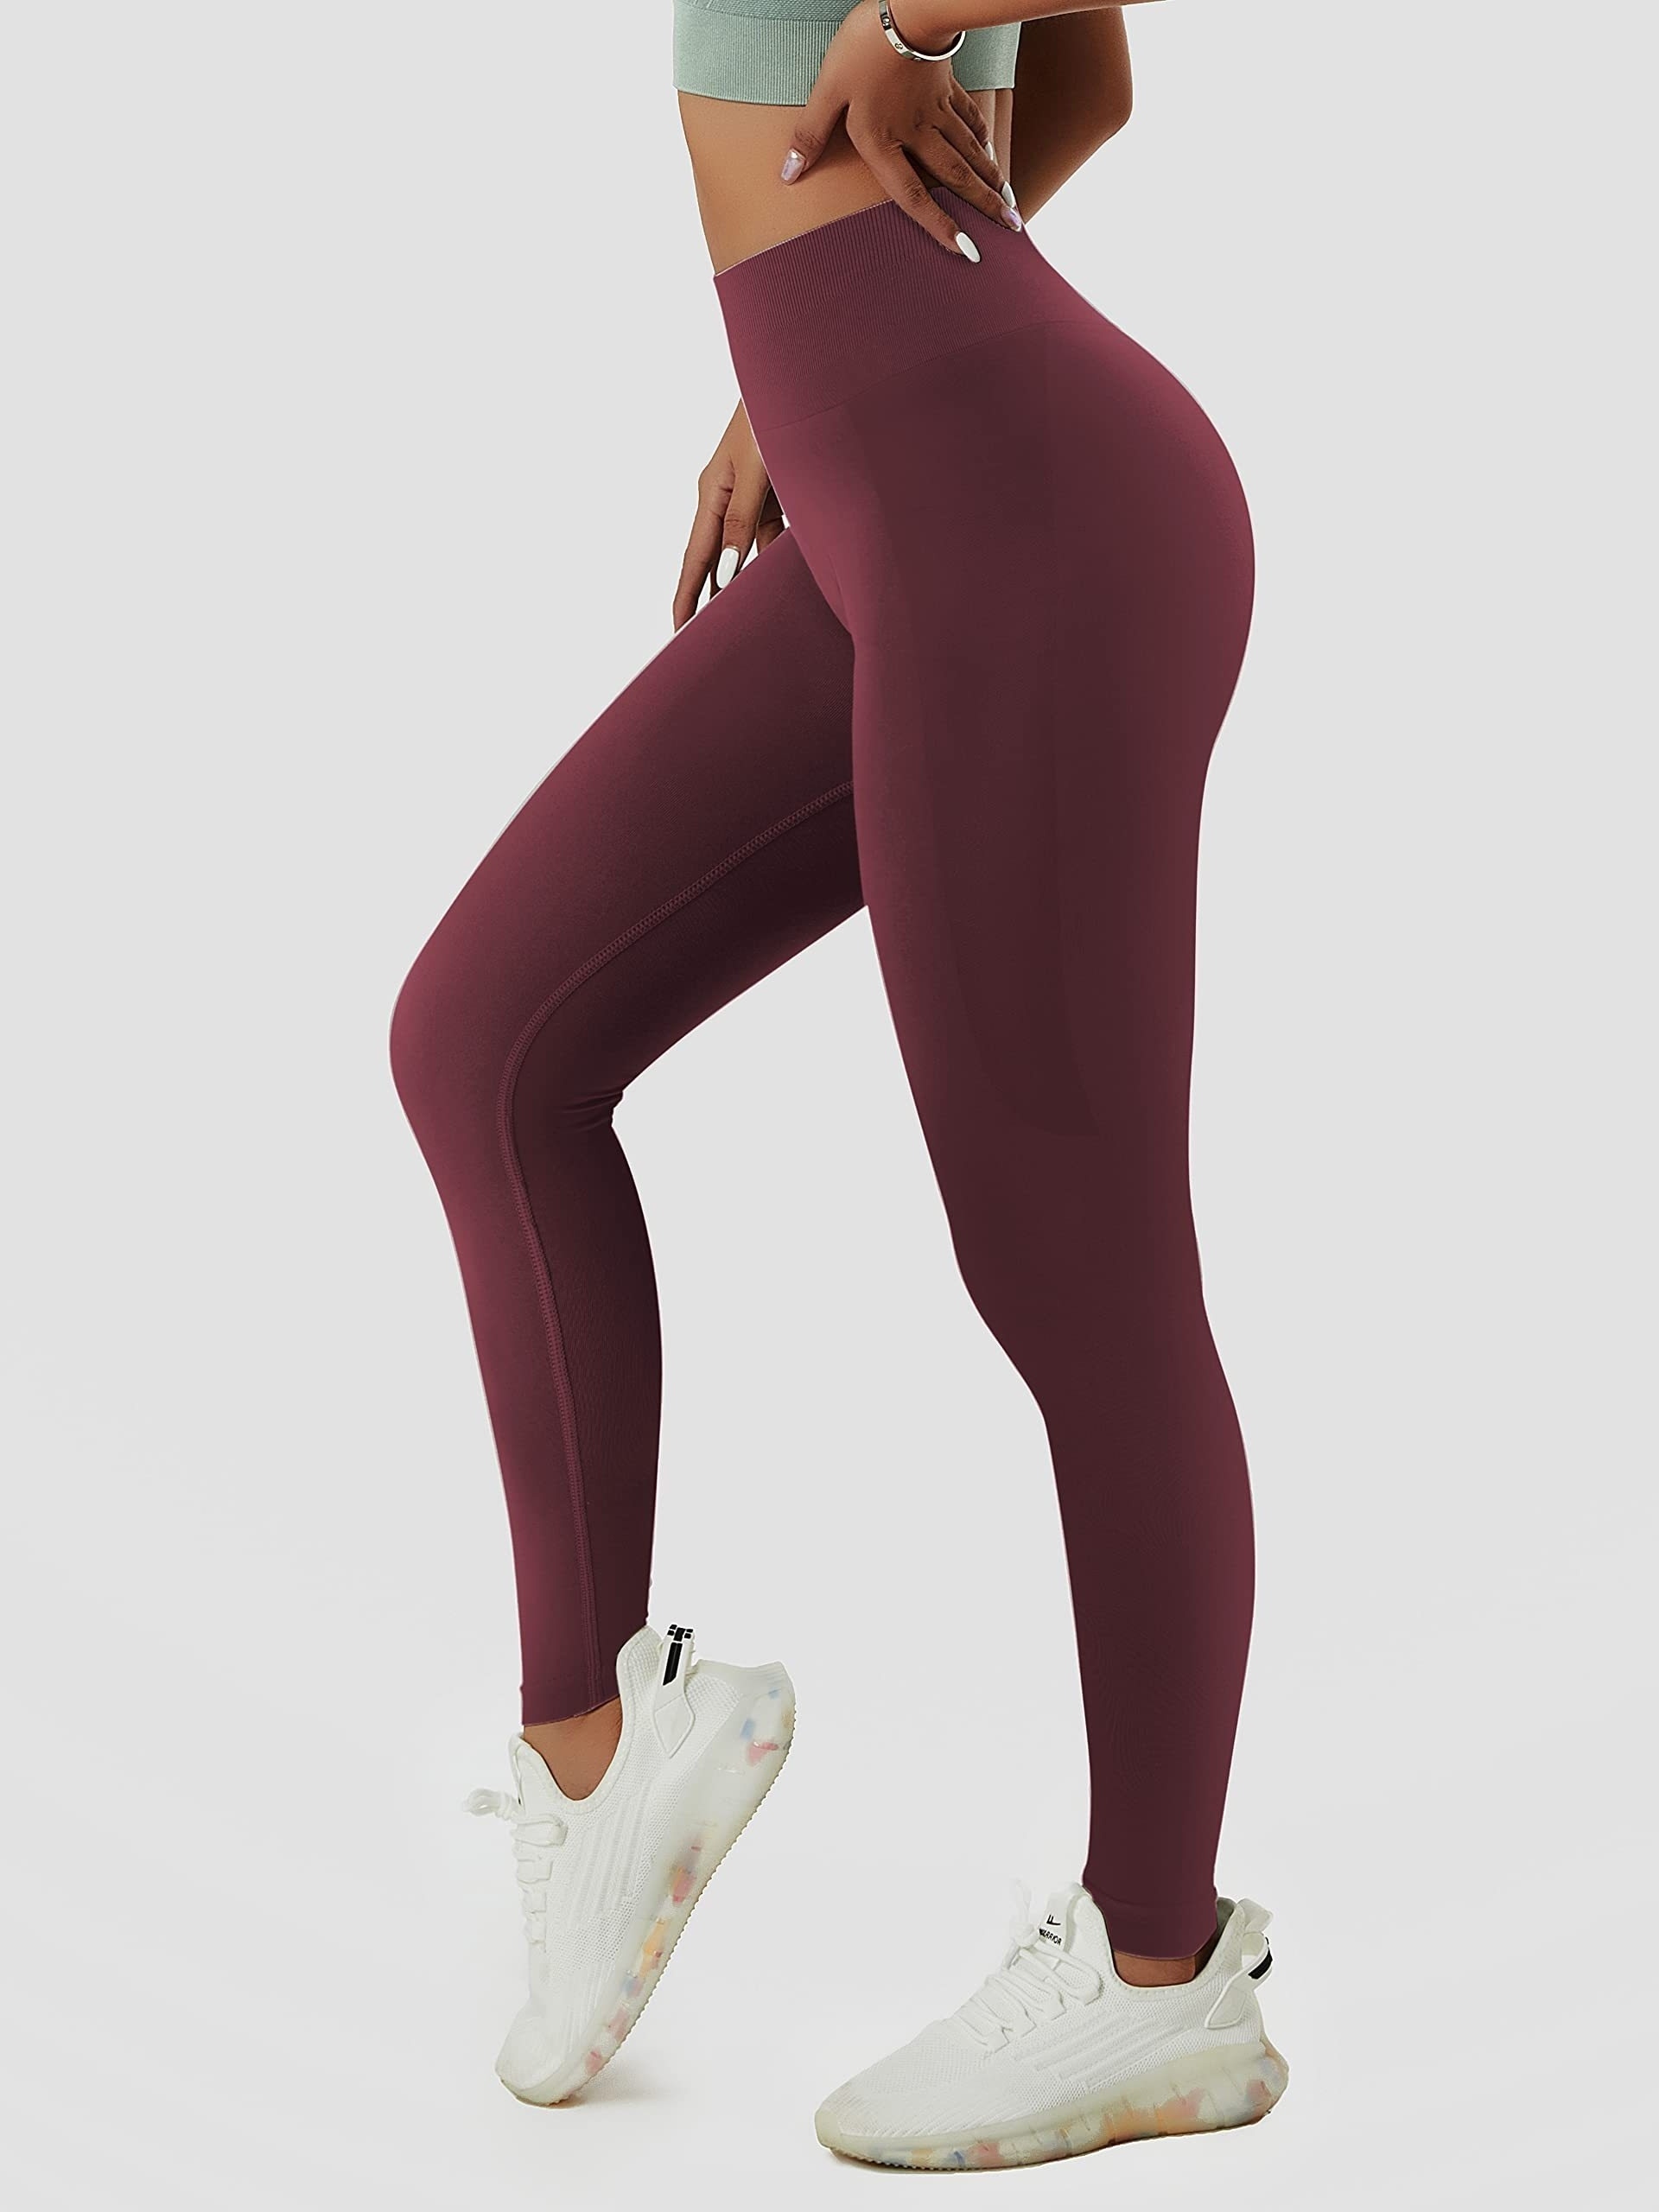 Women's Scrunch Ruched Butt Lifting Yoga Pants,Squat Proof Hip butt Workout  Running Fitness pants Leggings,C,XL price in UAE,  UAE